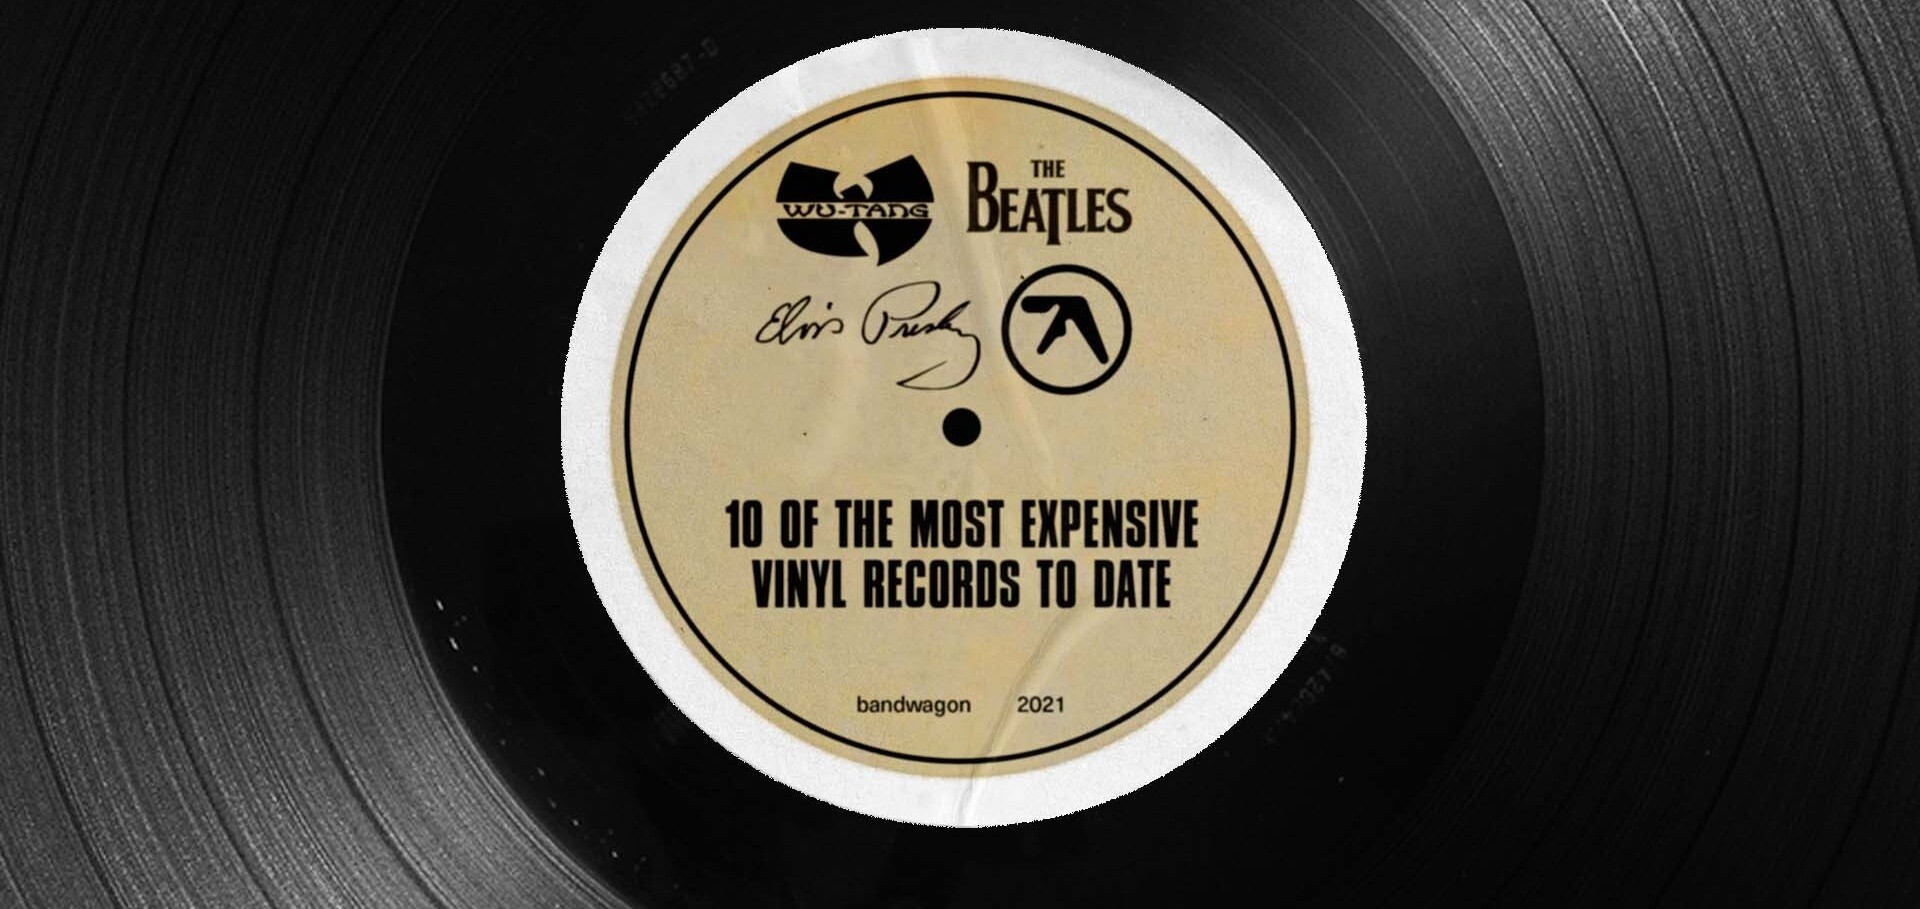 10 of the most expensive vinyl records to date